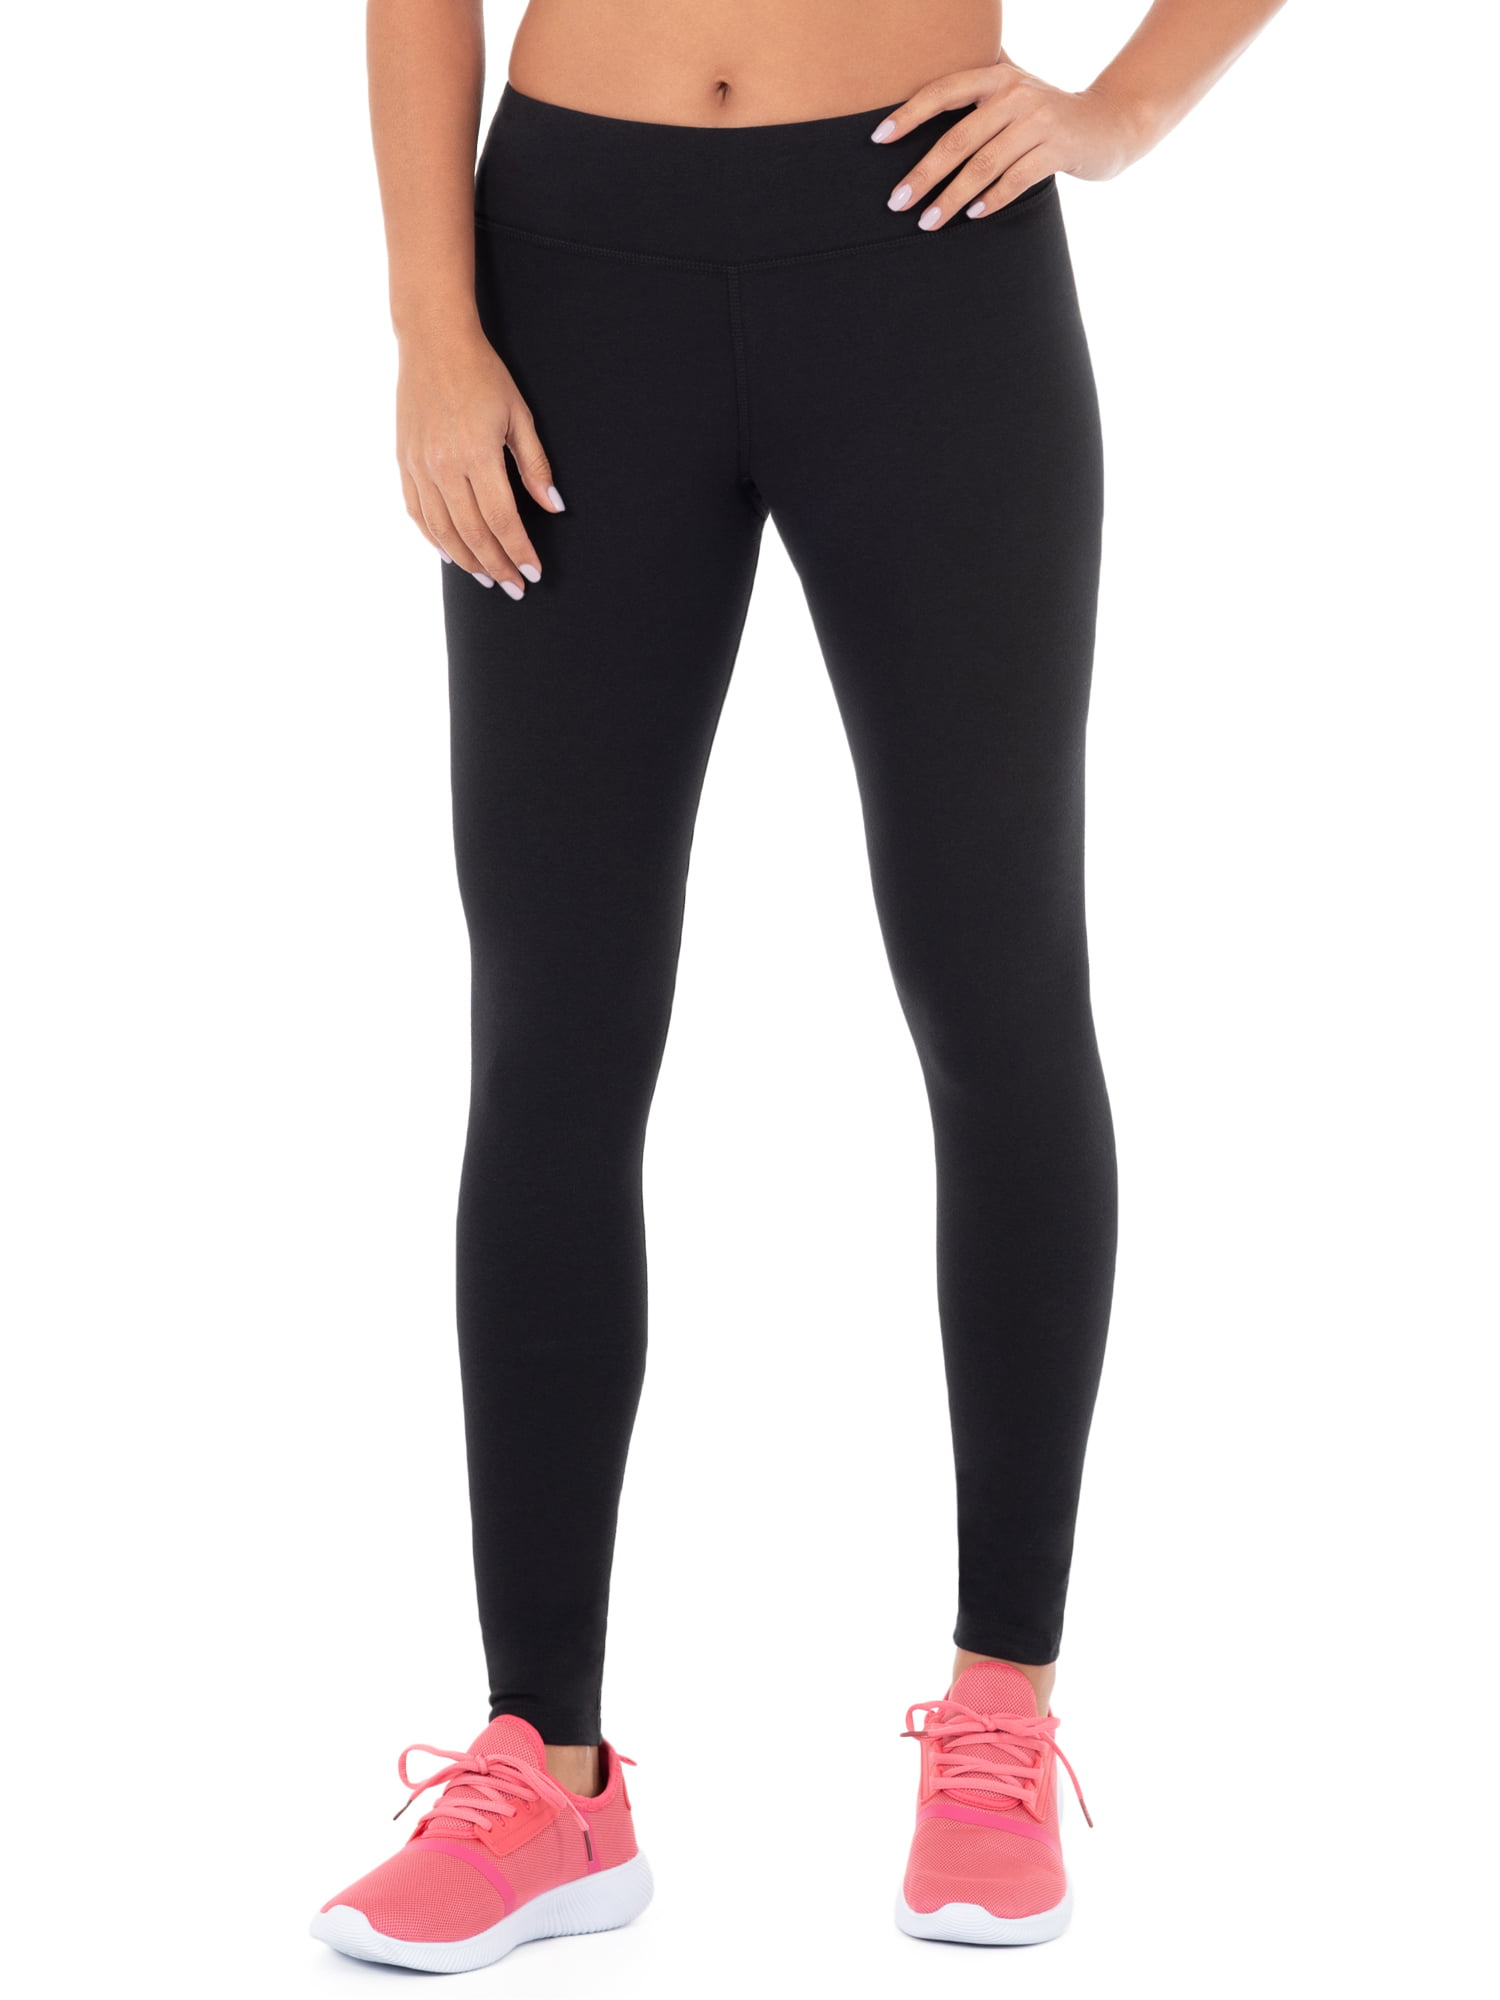 Running On The Wall Volleyball Leggings for Athletic Youth Girl Volleyball Players